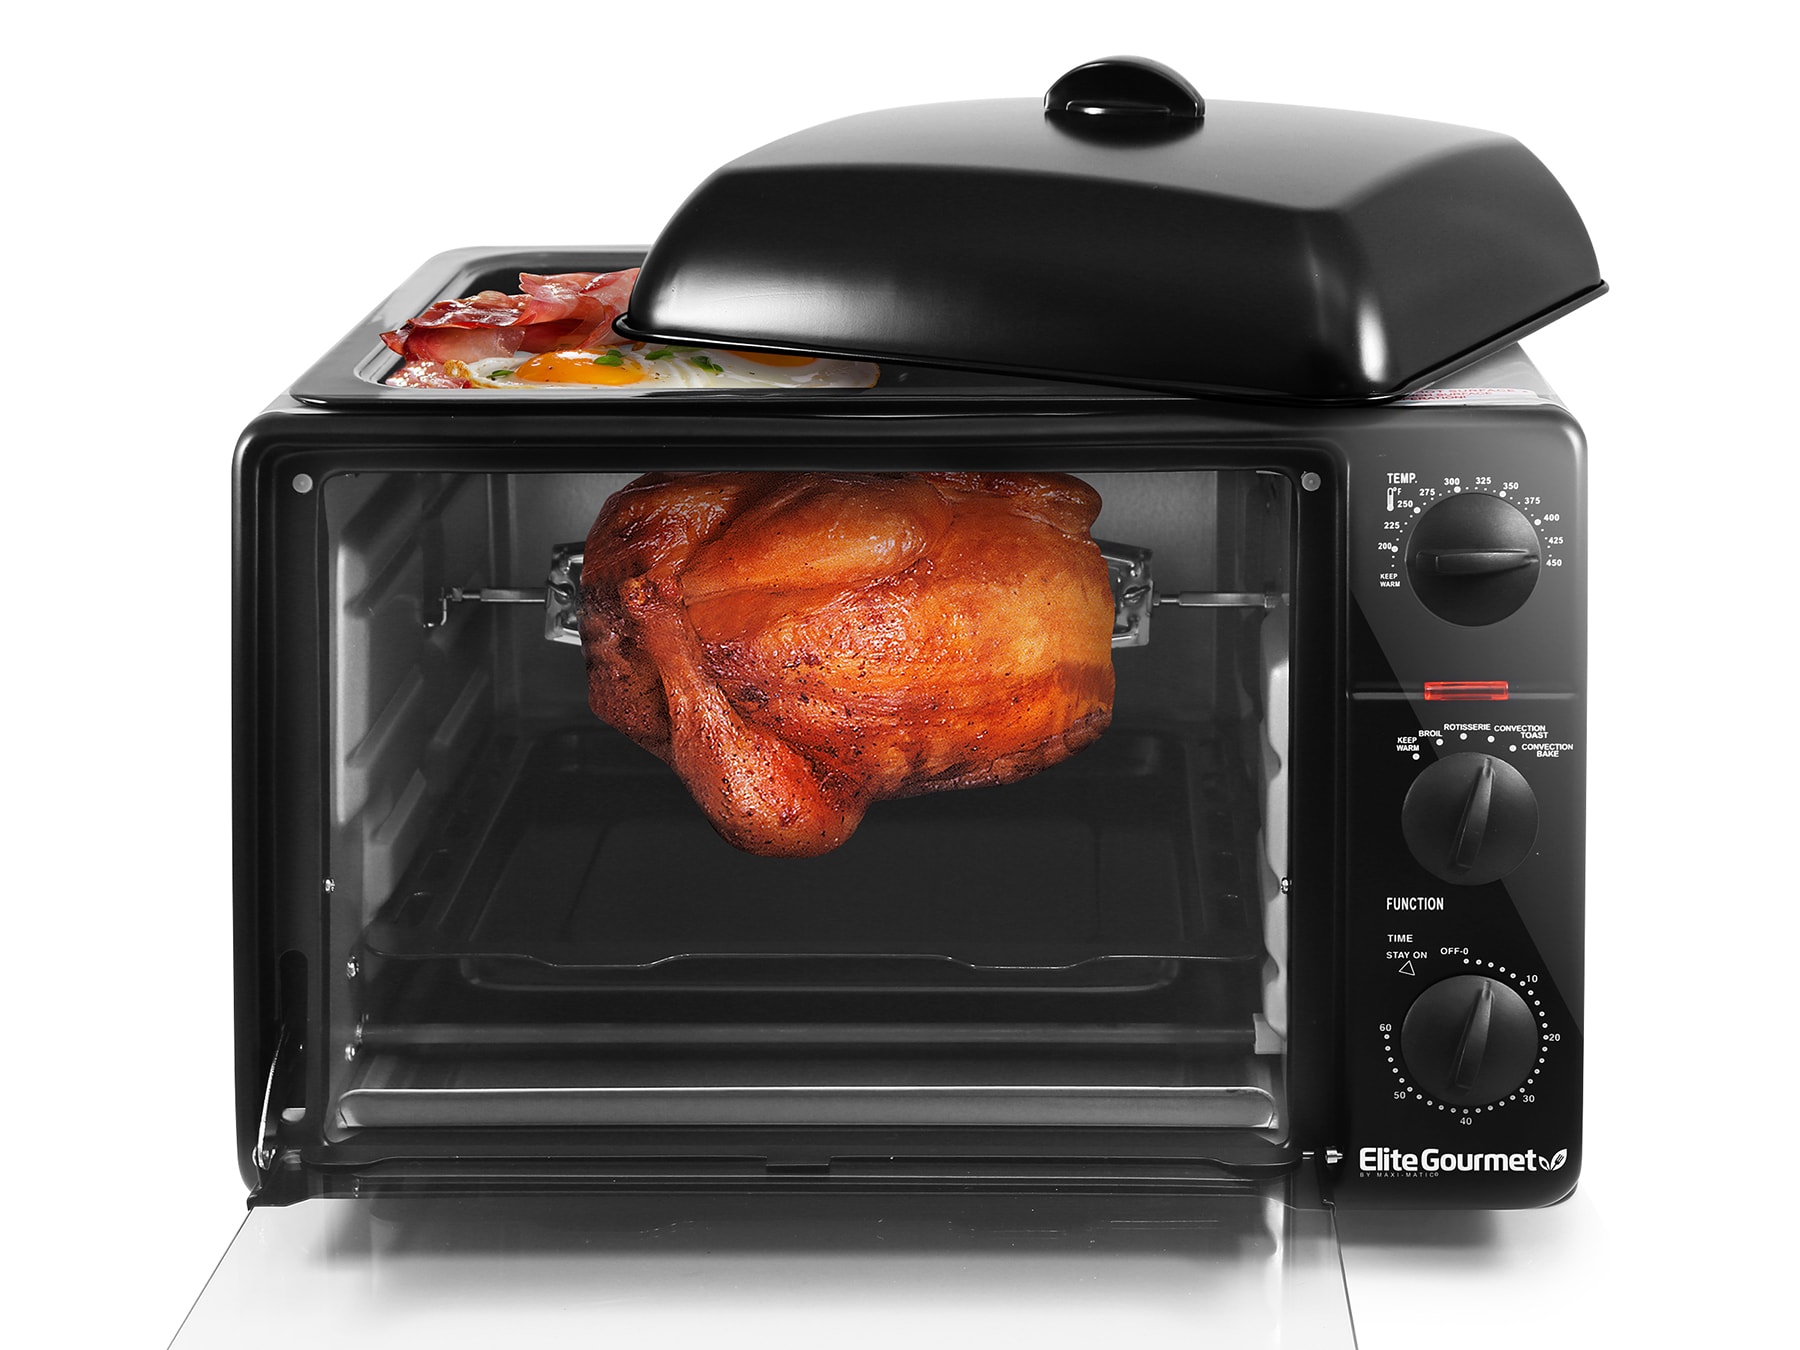 Steam, bake, broil, and toast from an app with this countertop smart oven